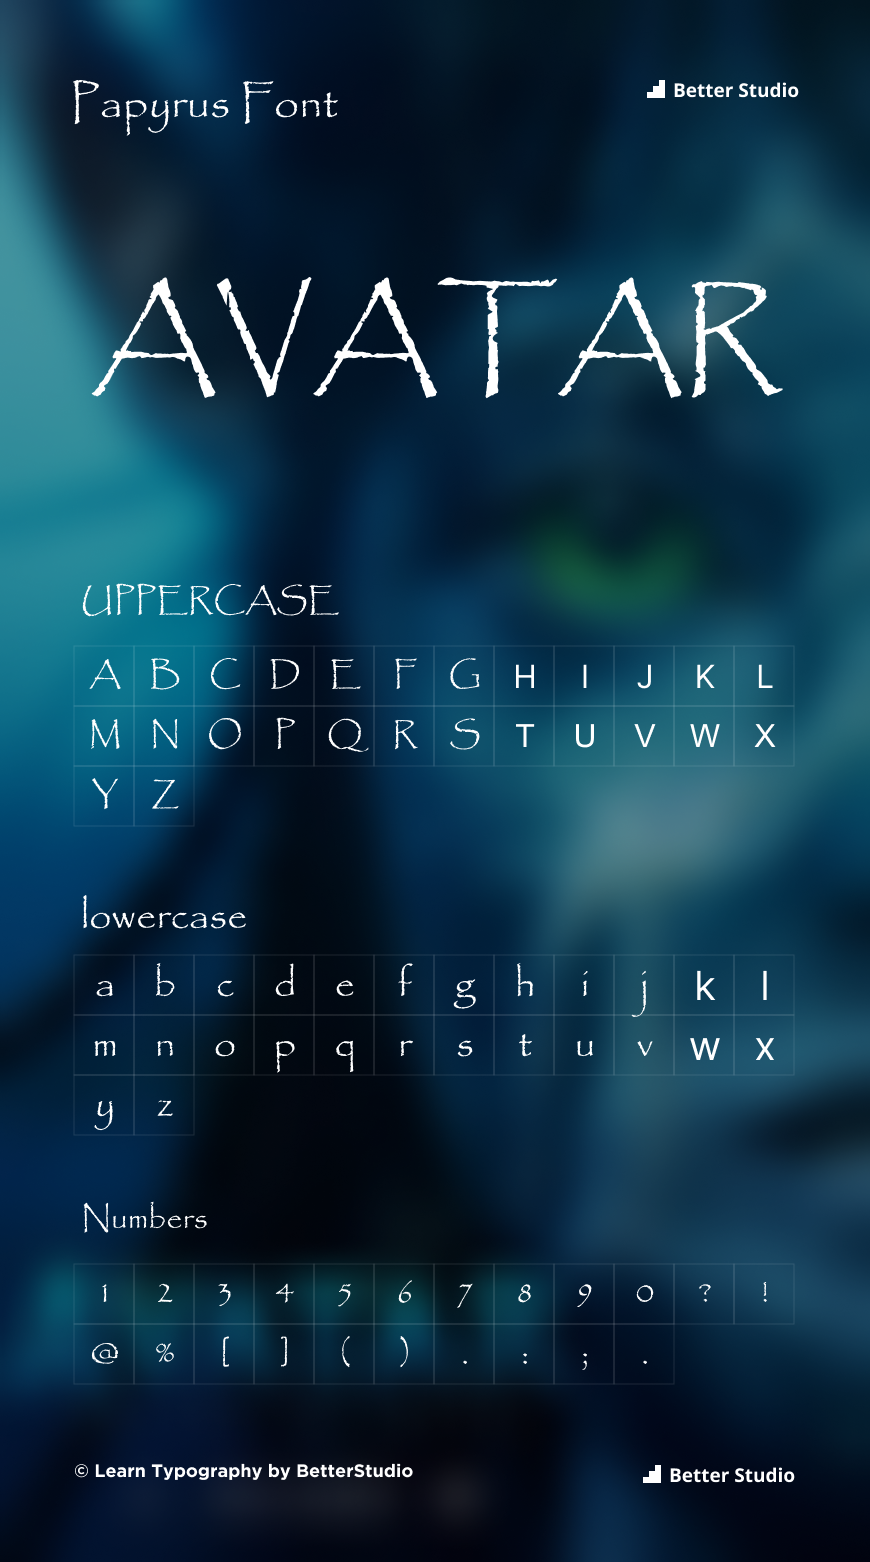 Avatar The Last Airbender Font Free Download  Fonts Bee